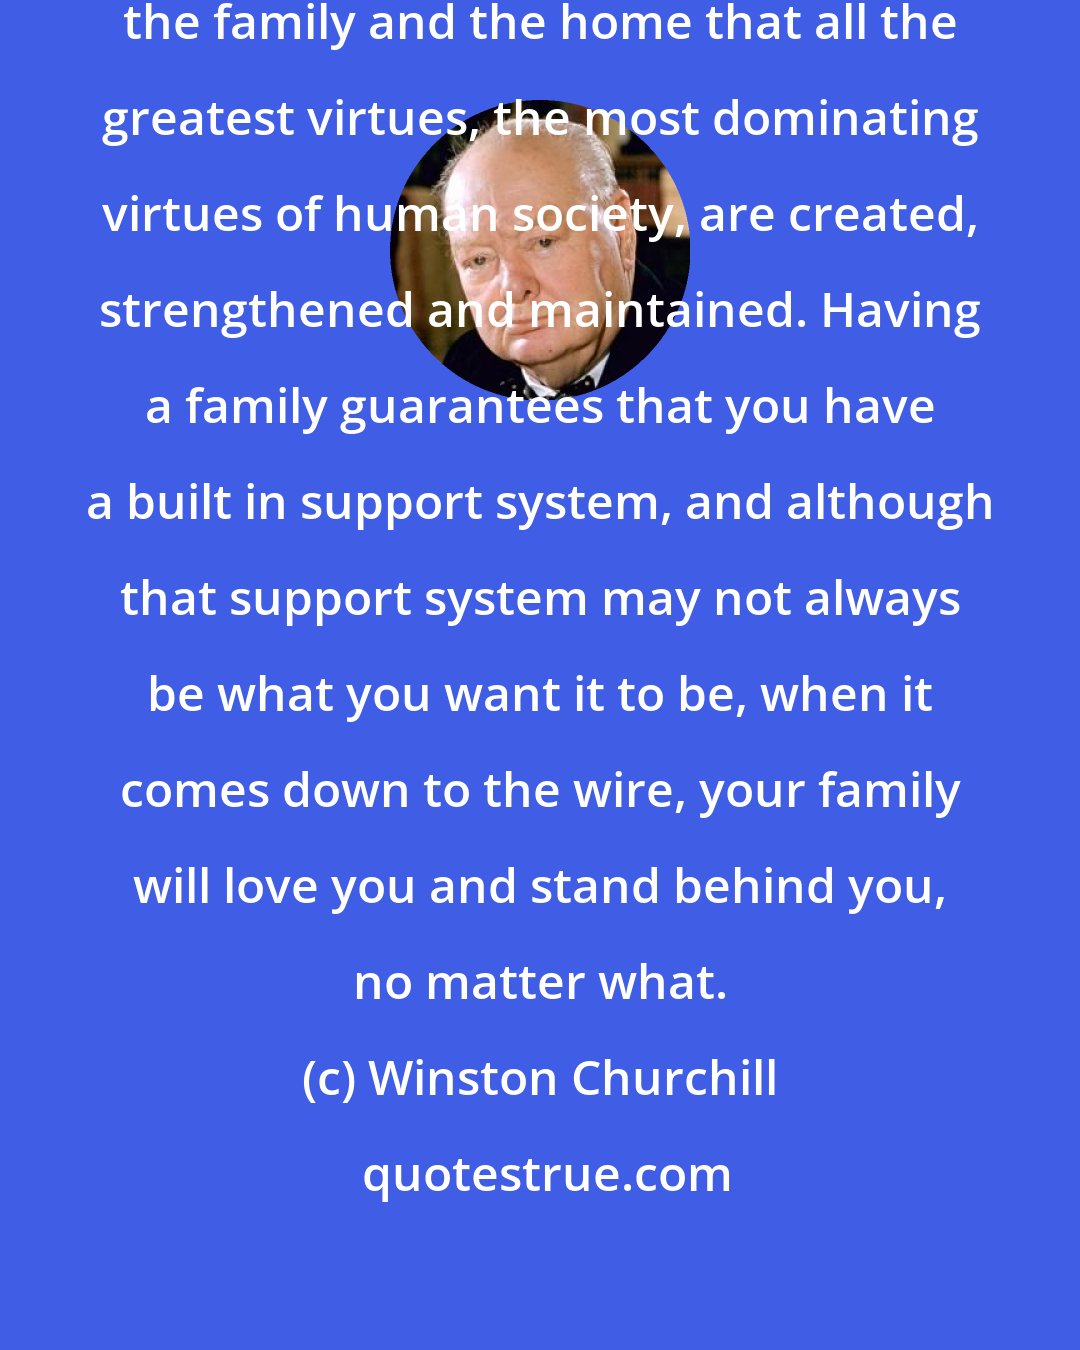 Winston Churchill: There is no doubt that it is around the family and the home that all the greatest virtues, the most dominating virtues of human society, are created, strengthened and maintained. Having a family guarantees that you have a built in support system, and although that support system may not always be what you want it to be, when it comes down to the wire, your family will love you and stand behind you, no matter what.